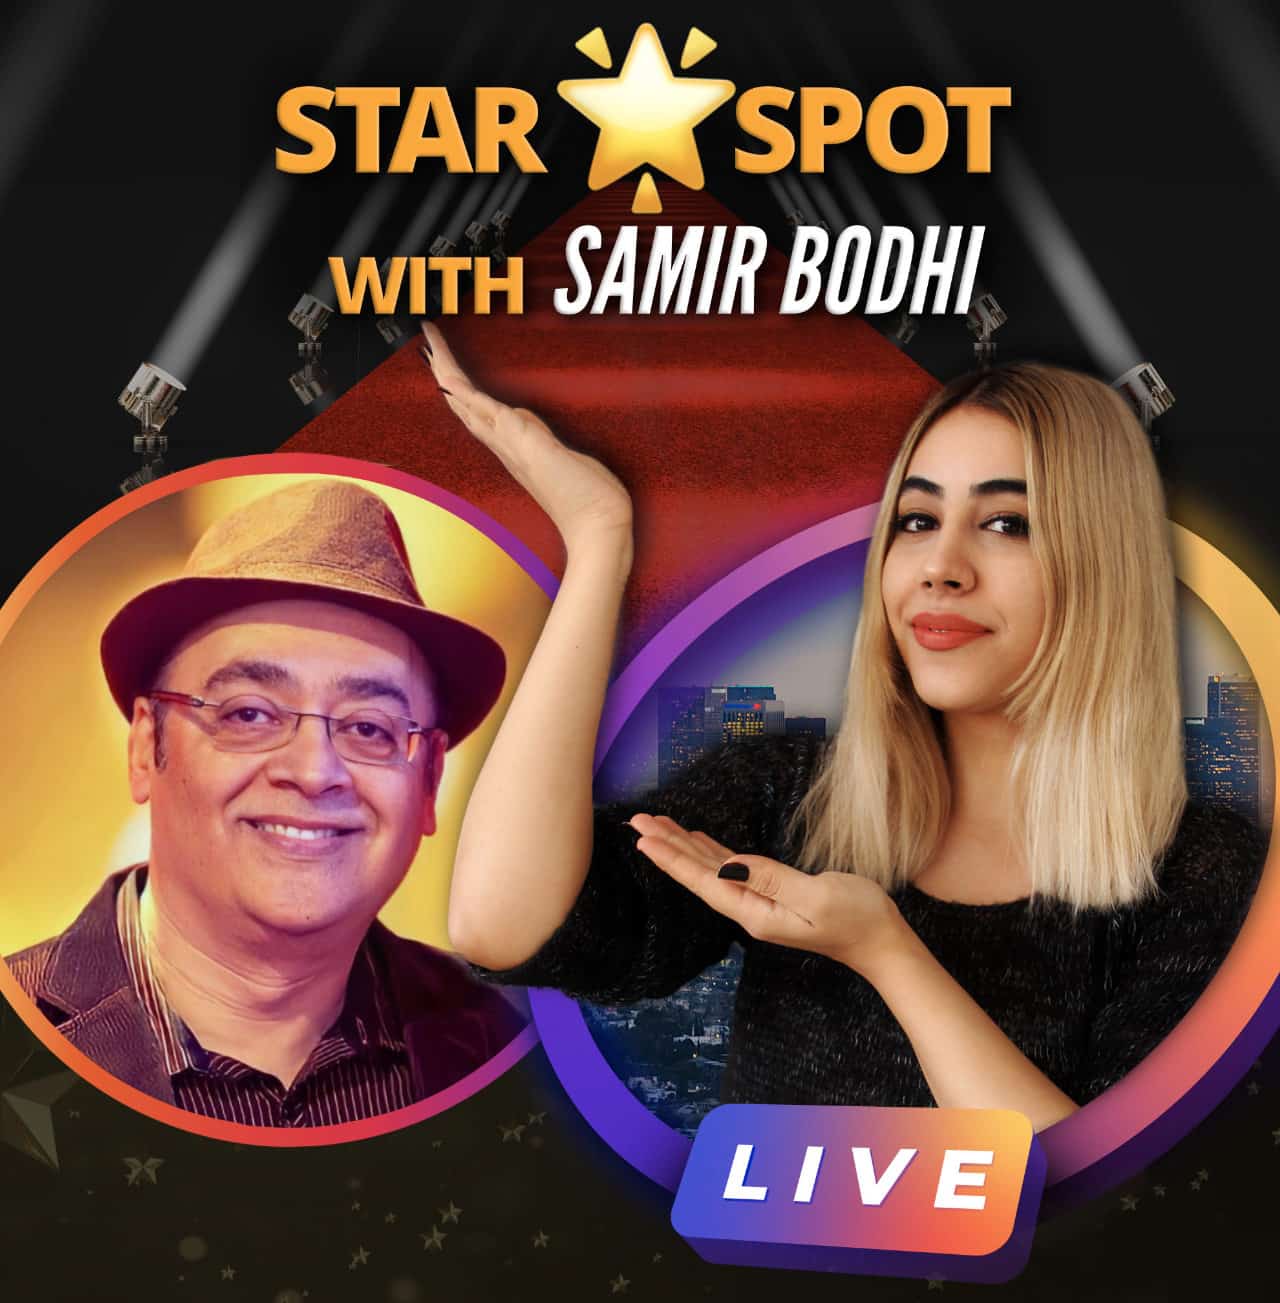 Promotional cover art of Star Spot with Samir Bodhi